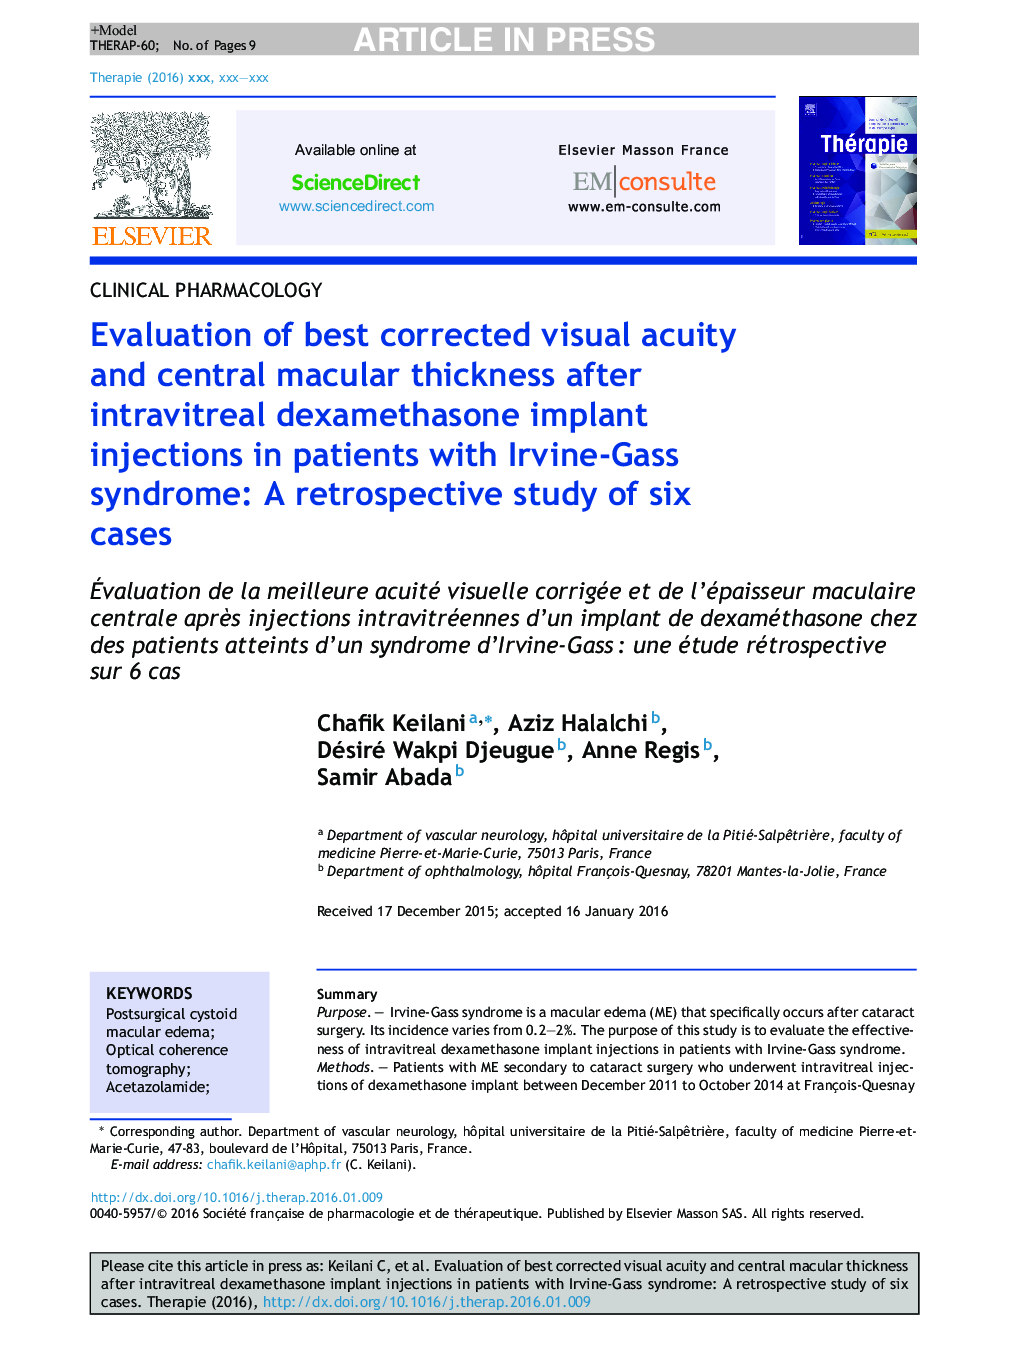 Evaluation of best corrected visual acuity and central macular thickness after intravitreal dexamethasone implant injections in patients with Irvine-Gass syndrome: A retrospective study of six cases